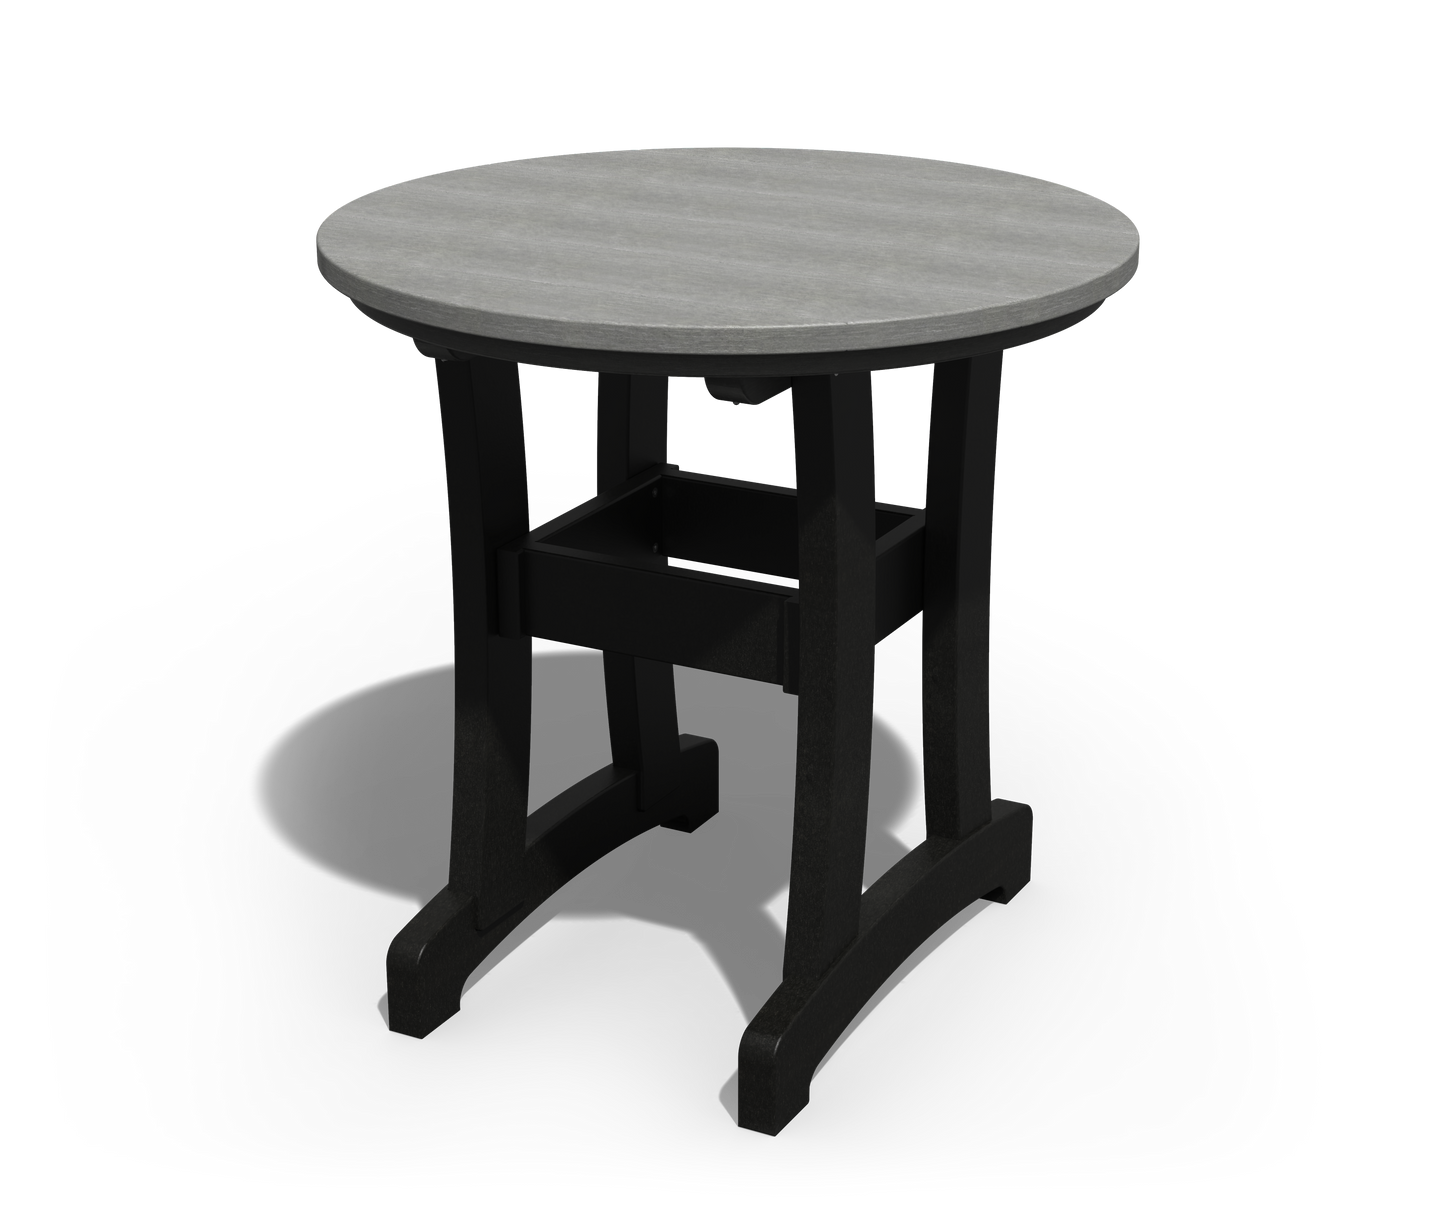 Patiova Recycled Plastic 30" Round Legacy Dining Table - LEAD TIME TO SHIP 4 WEEKS